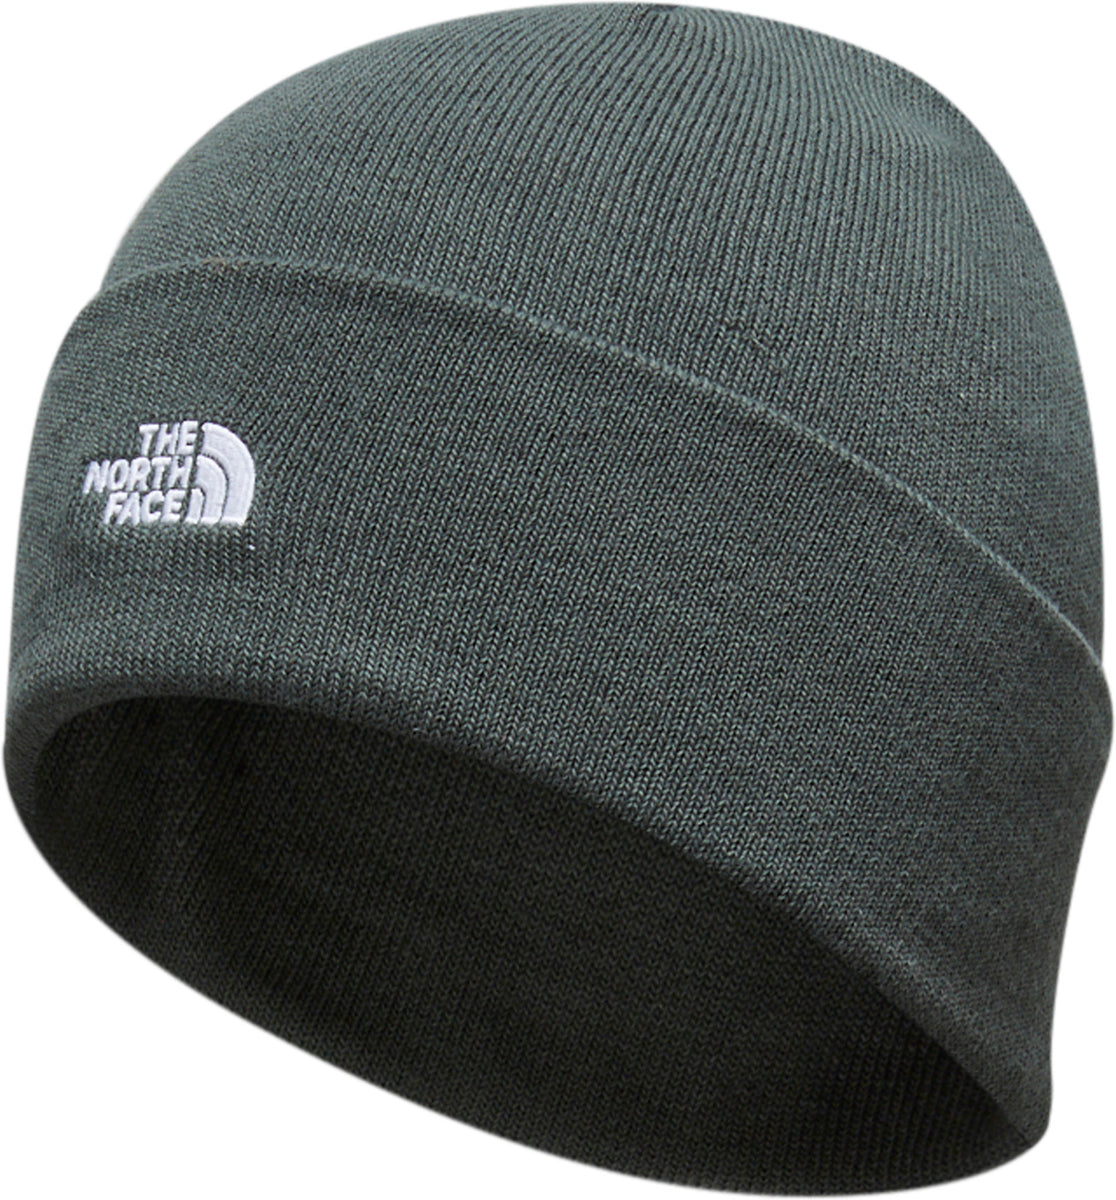 The North Face Norm Beanie - Unisex | Altitude Sports